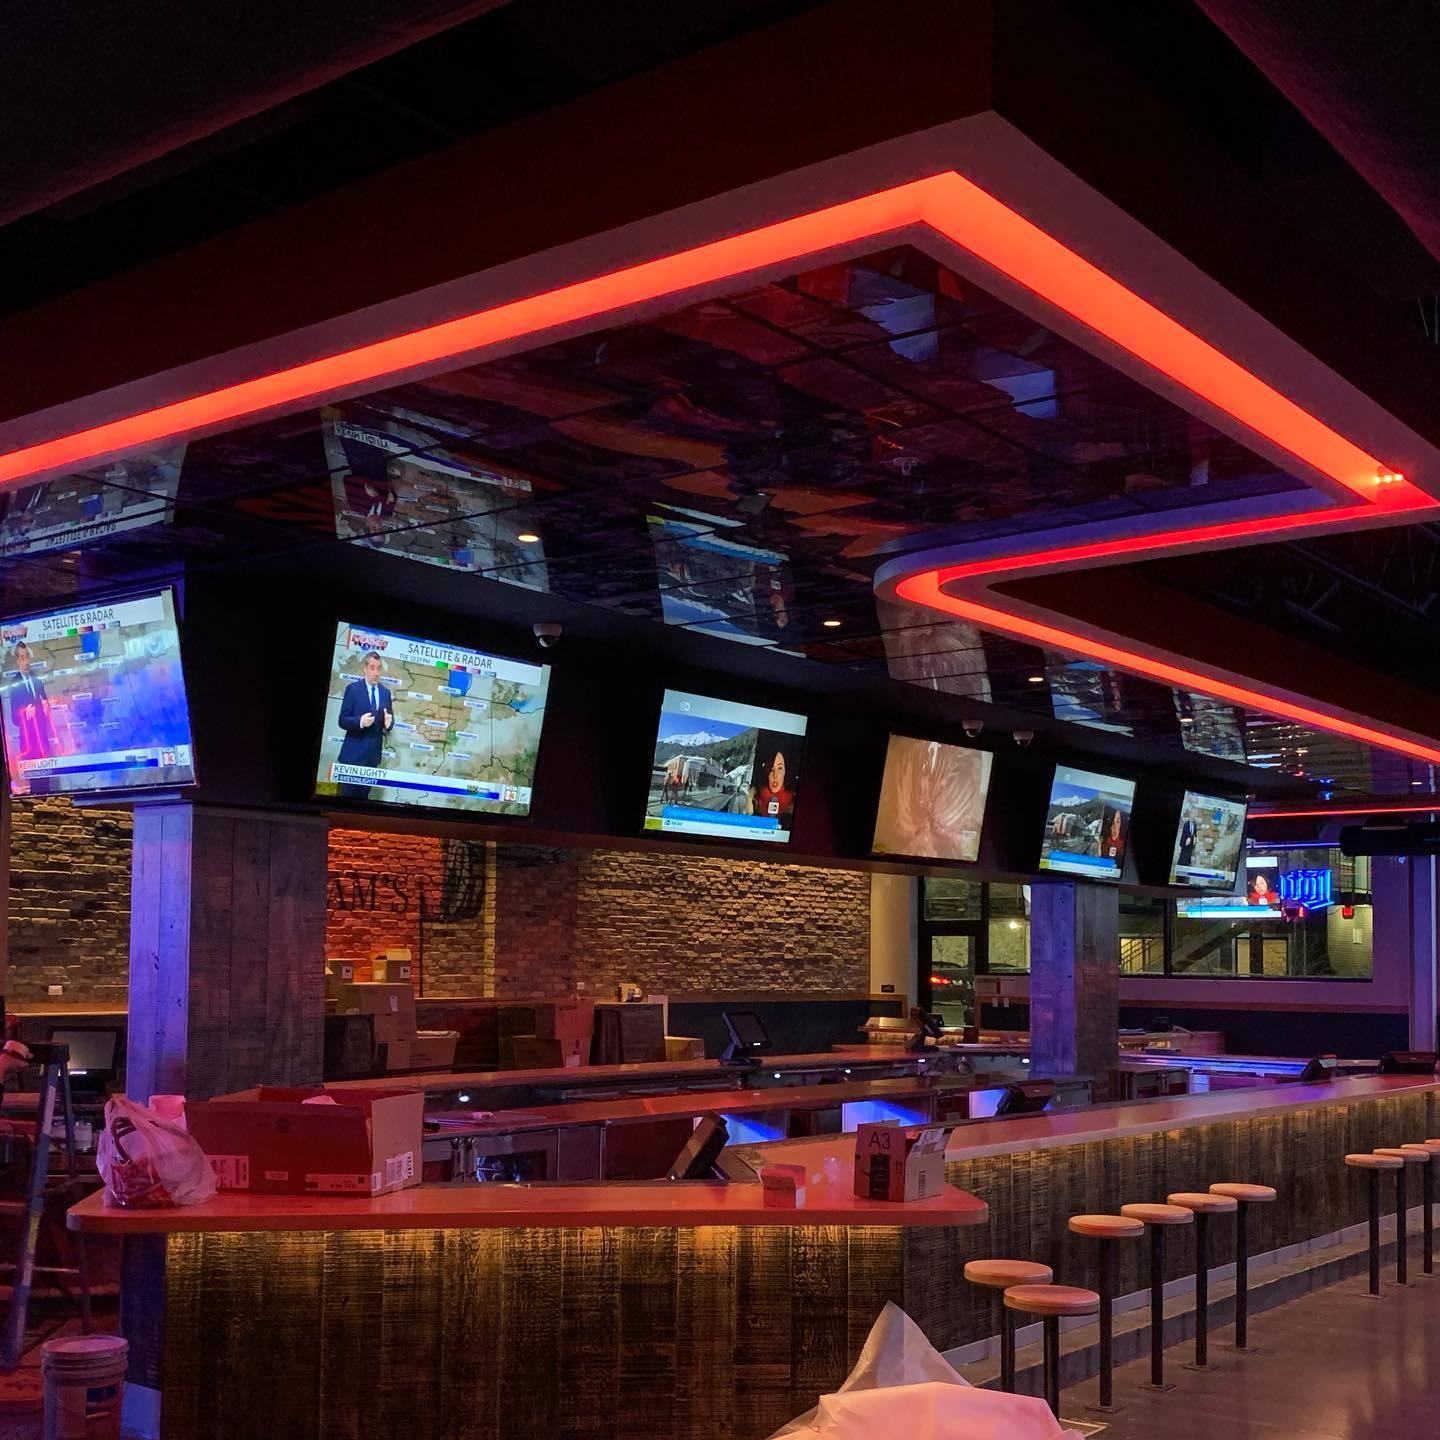 Image: View of a bar with stool seating on the right. There are six televisions above the bar. Photo from KAM's Facebook page.